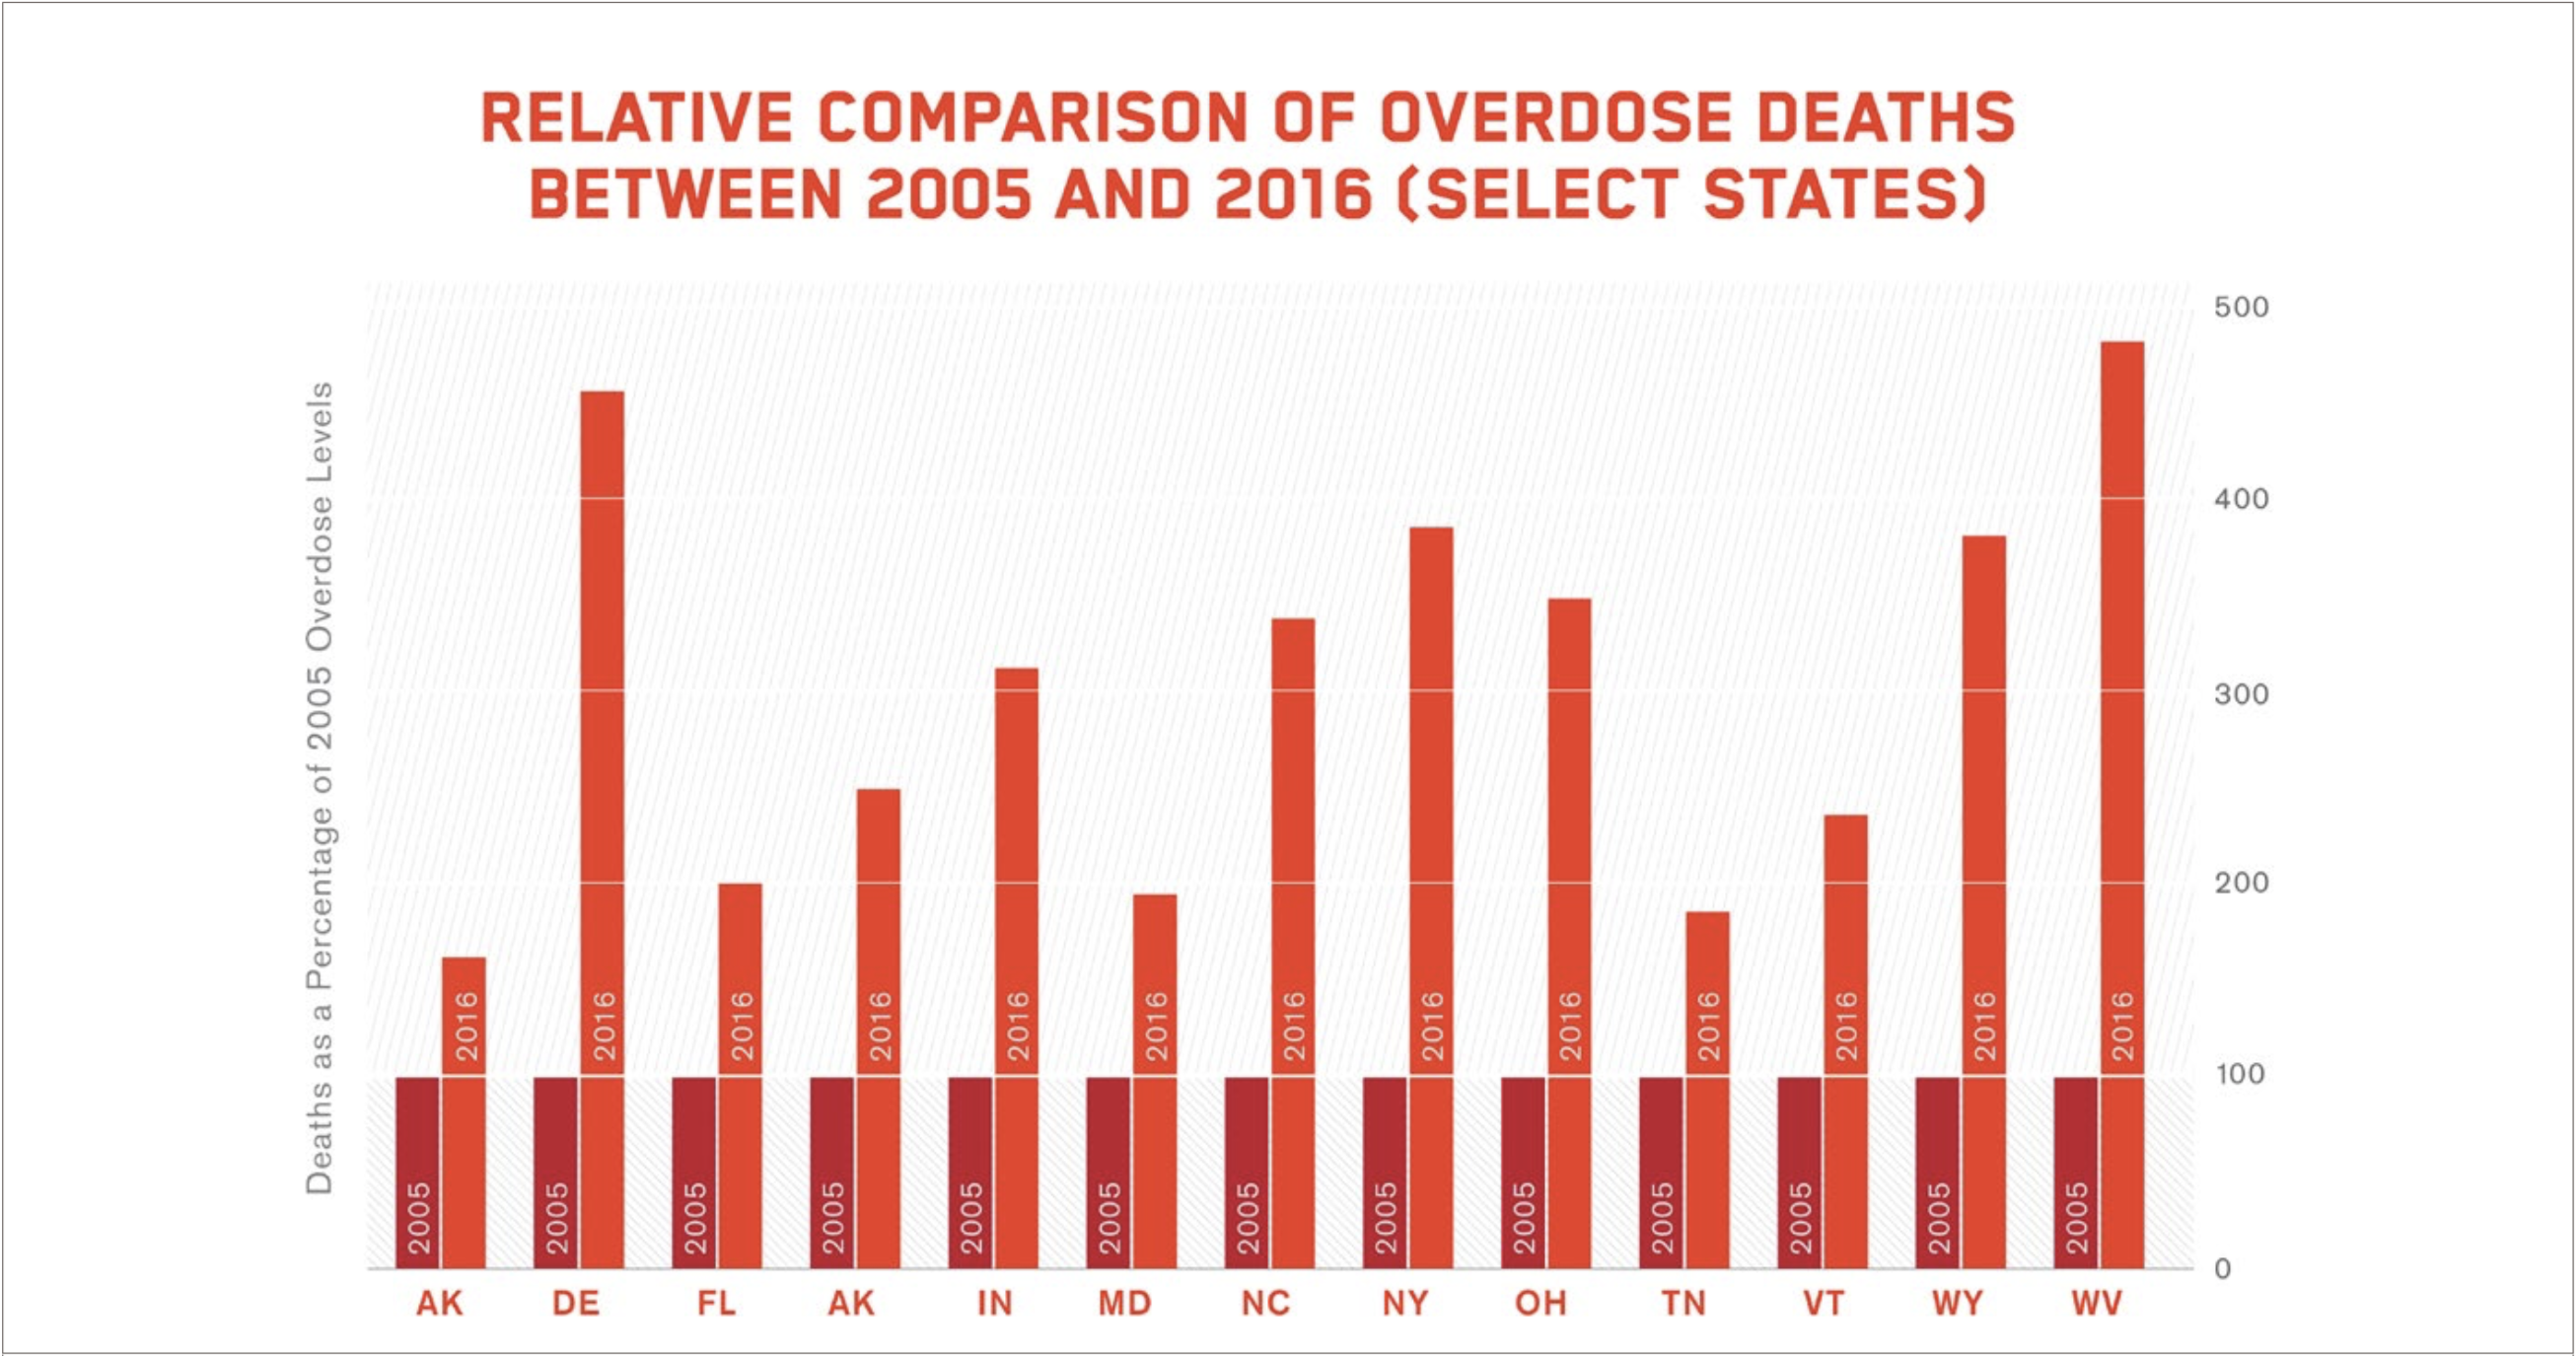 Chart: Relative Comparison of Overdose Deaths Between 2005 and 2016 (Select States)